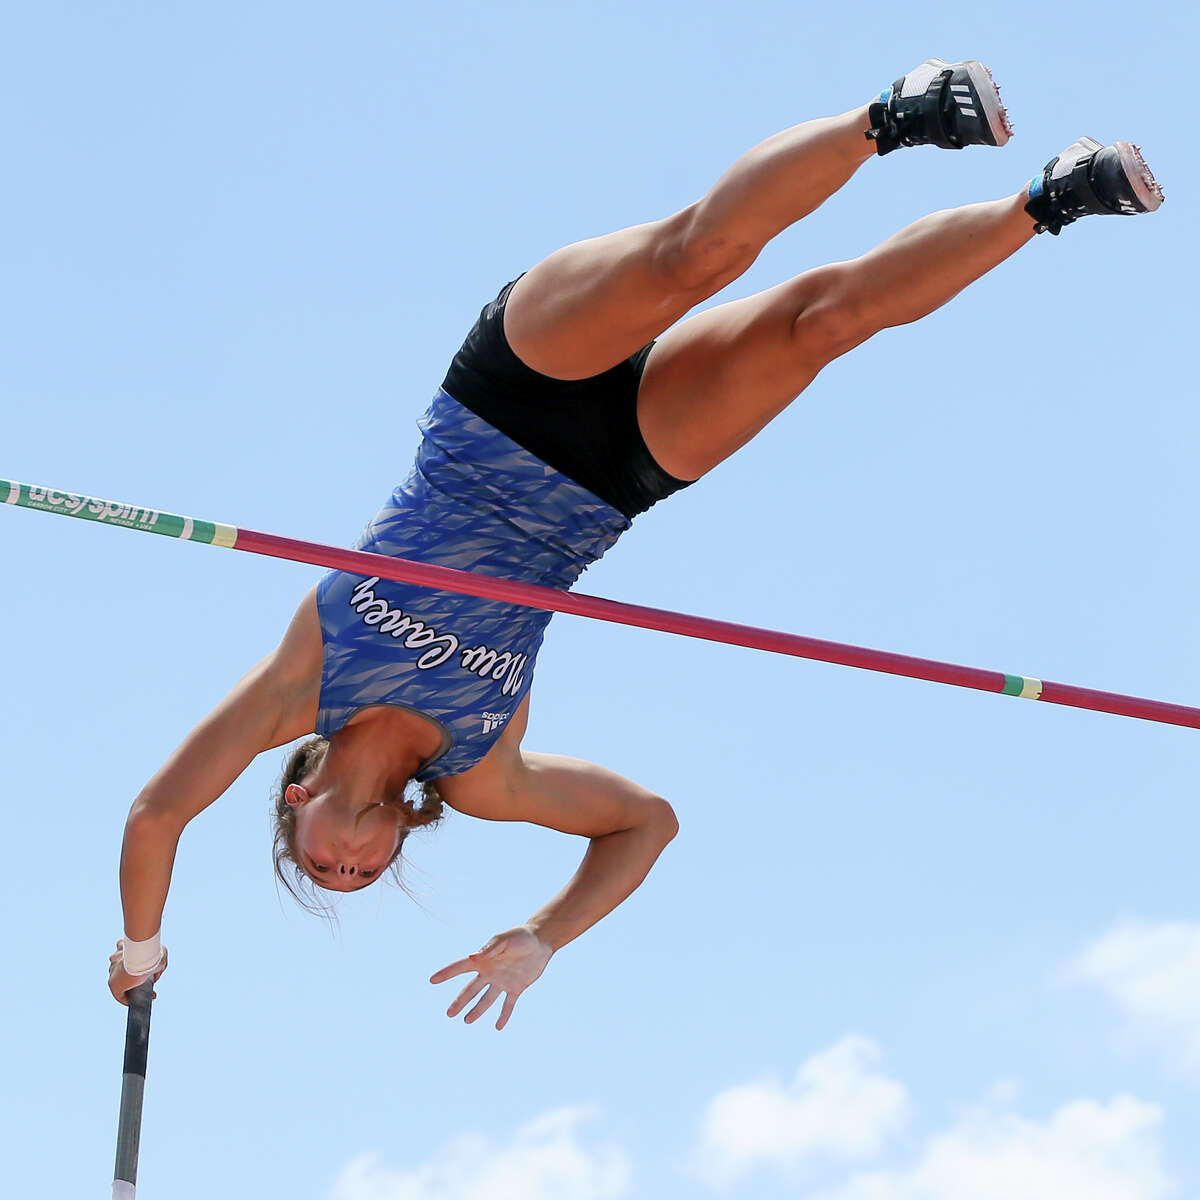 New Caney's Nastassja Campbell clears 13 feet, 9 inches to set a new Class 5A girls record in the 5A girls pole vault during the first day of the UIL state track and field championships at Mike A. Myers Stadium in Austin on Friday, May 11, 2018. MARVIN PFEIFFER/mpfeiffer@express-news.net